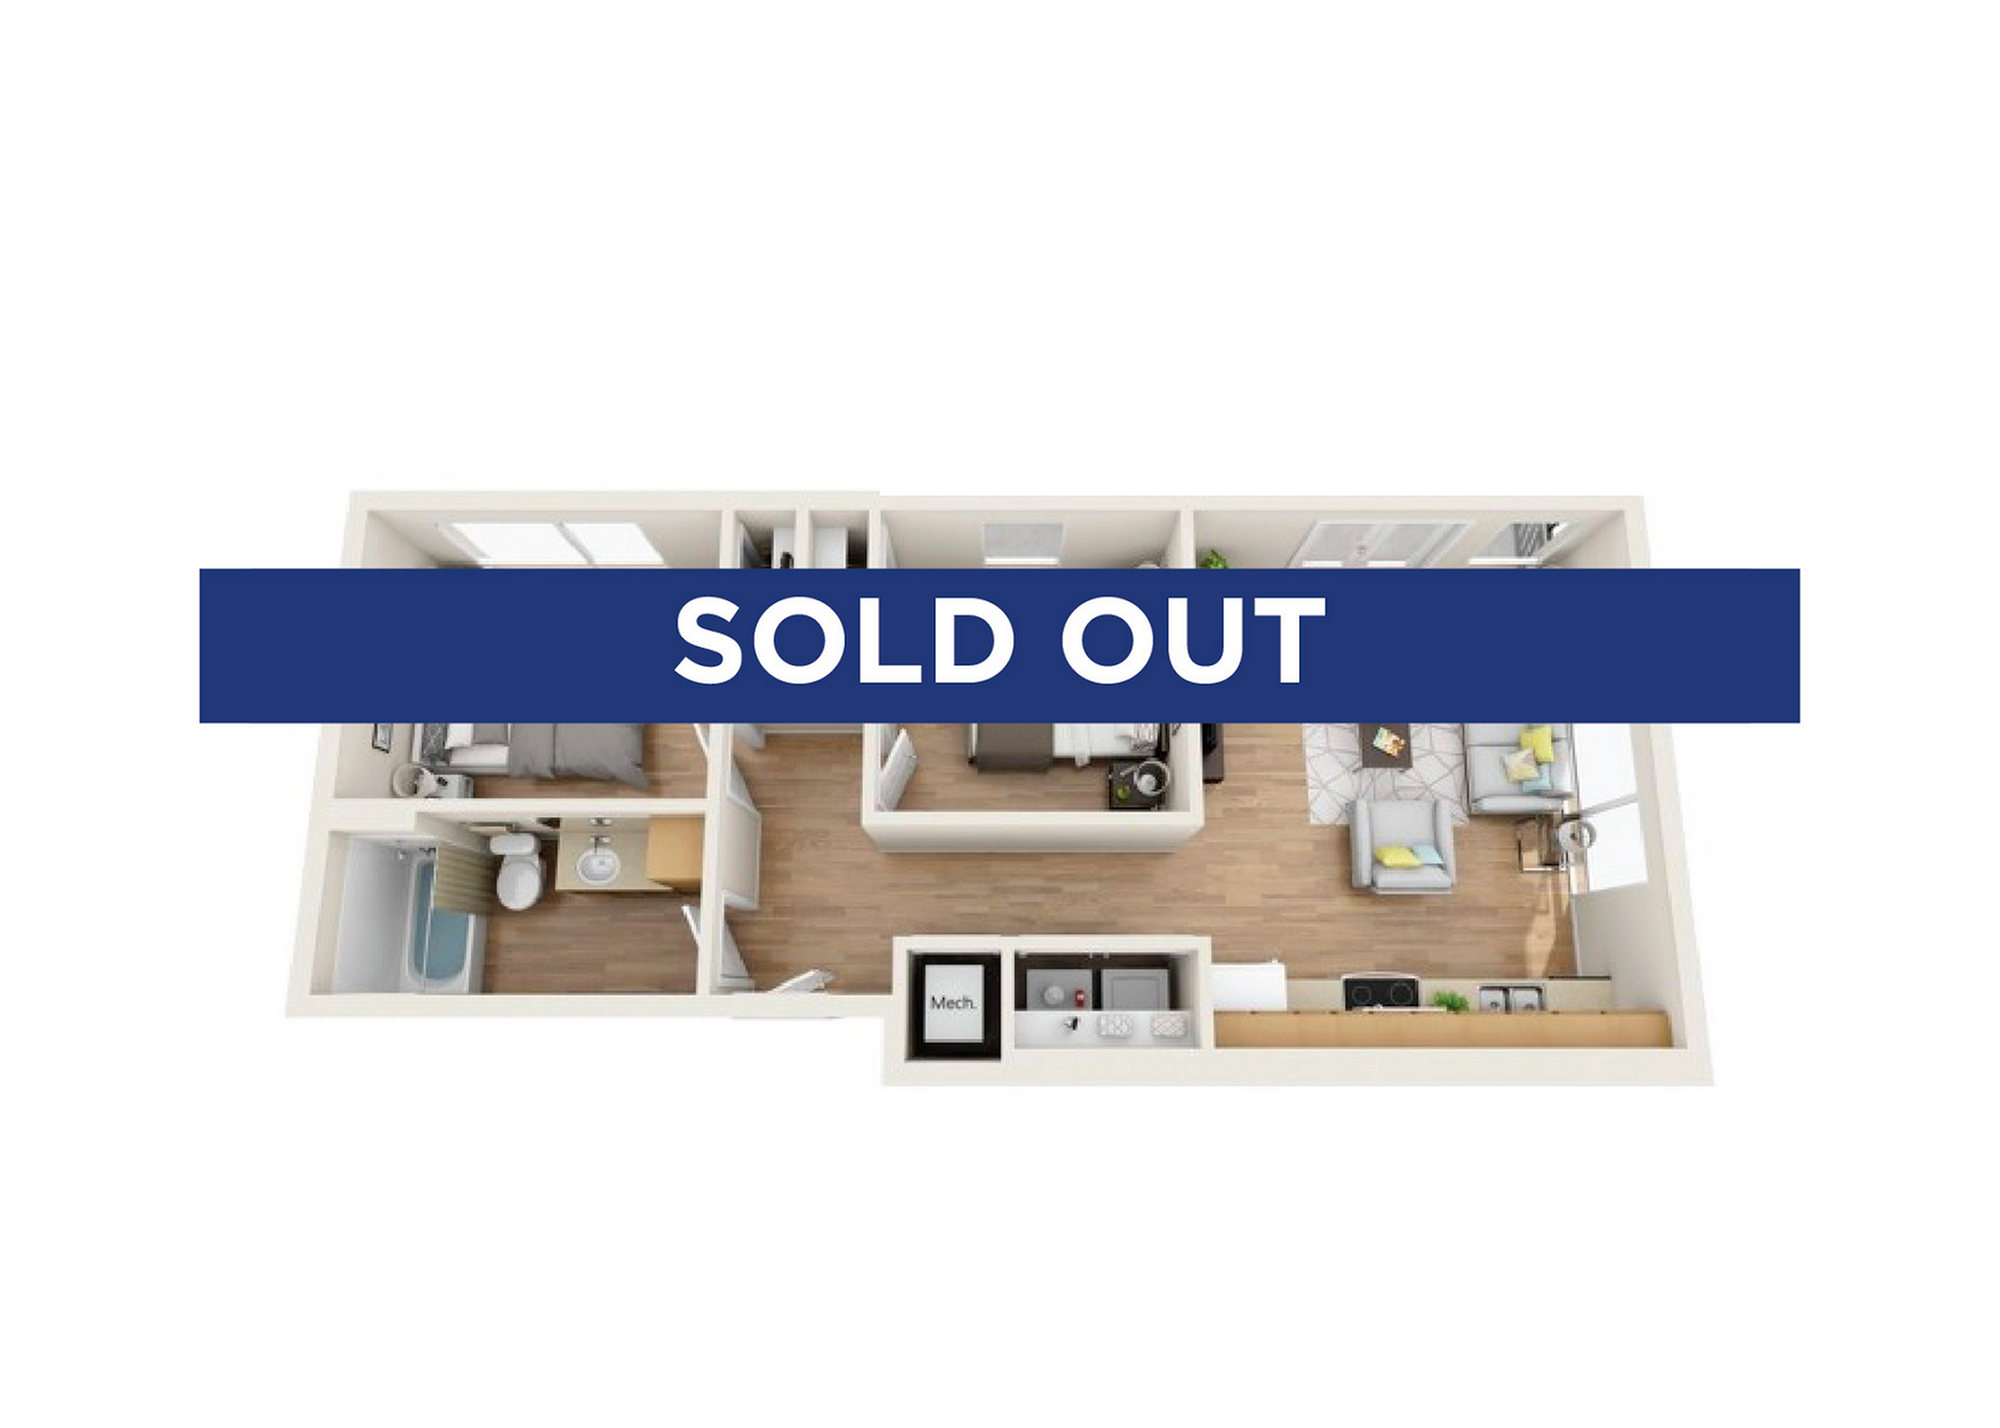 2BR/1BA - D - Sold Out